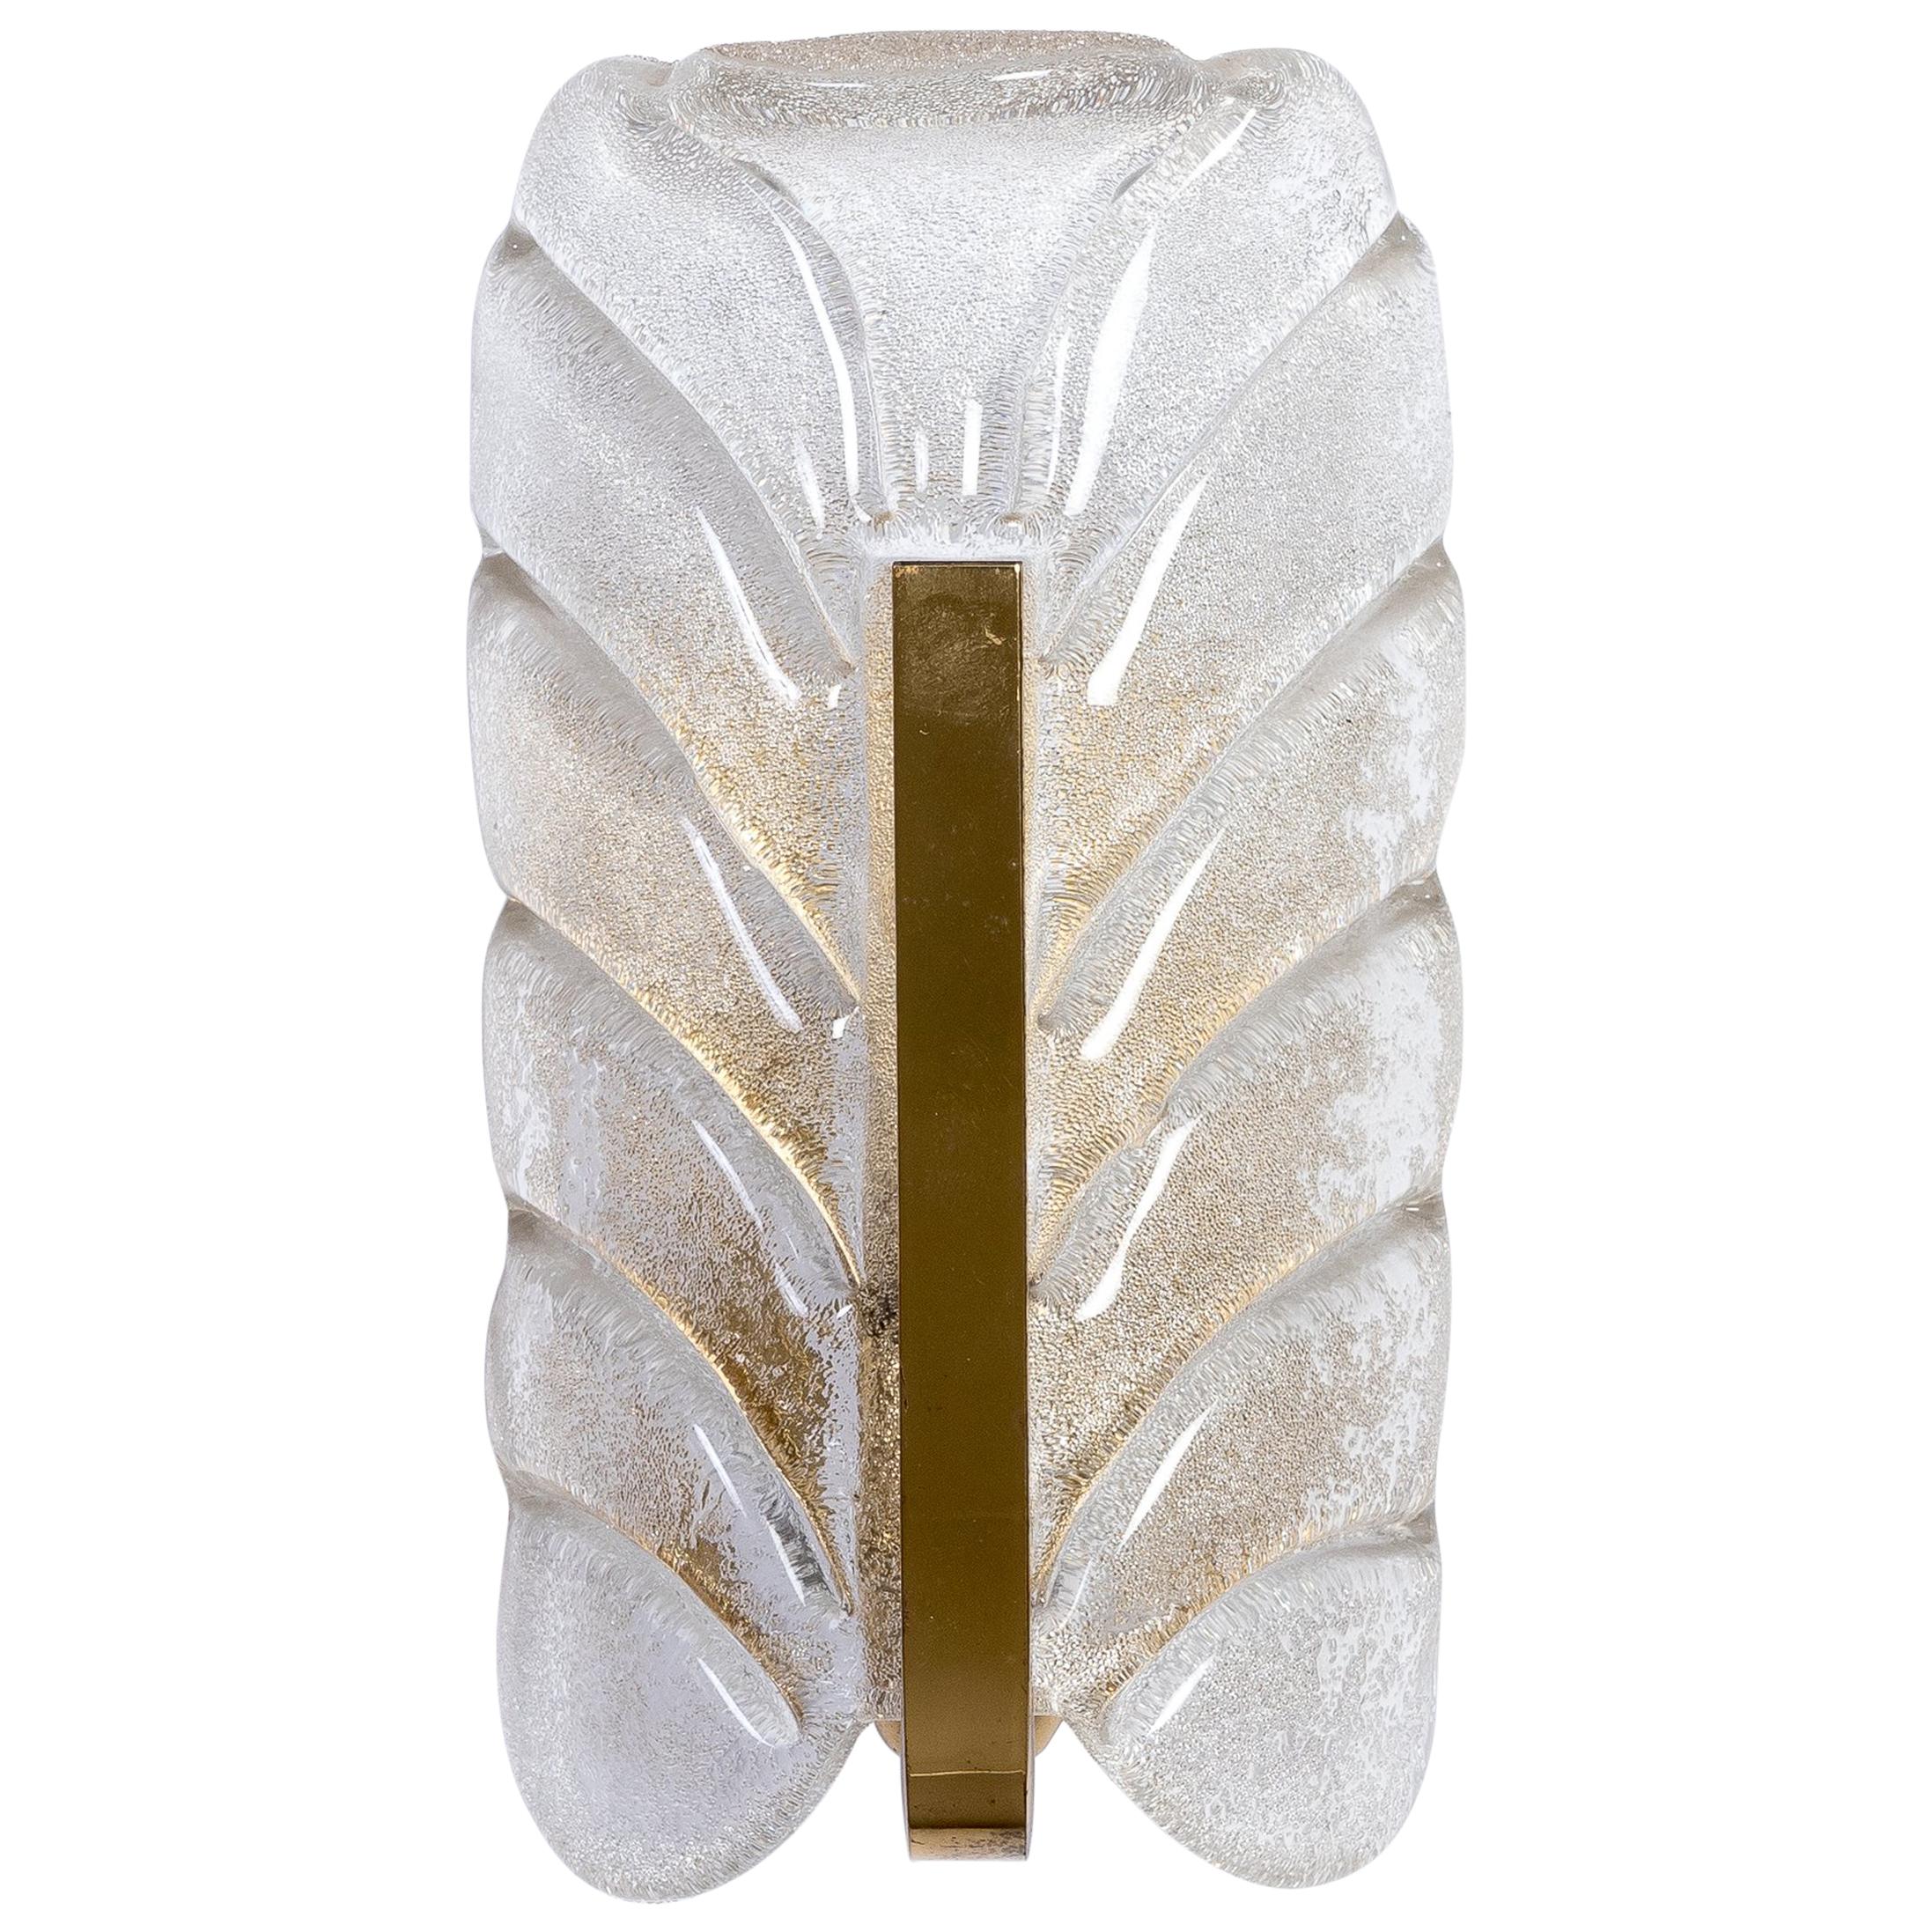 Exquisite Mid-Century Modernist Sconce by Carl Fagerlund for Orrefors For Sale